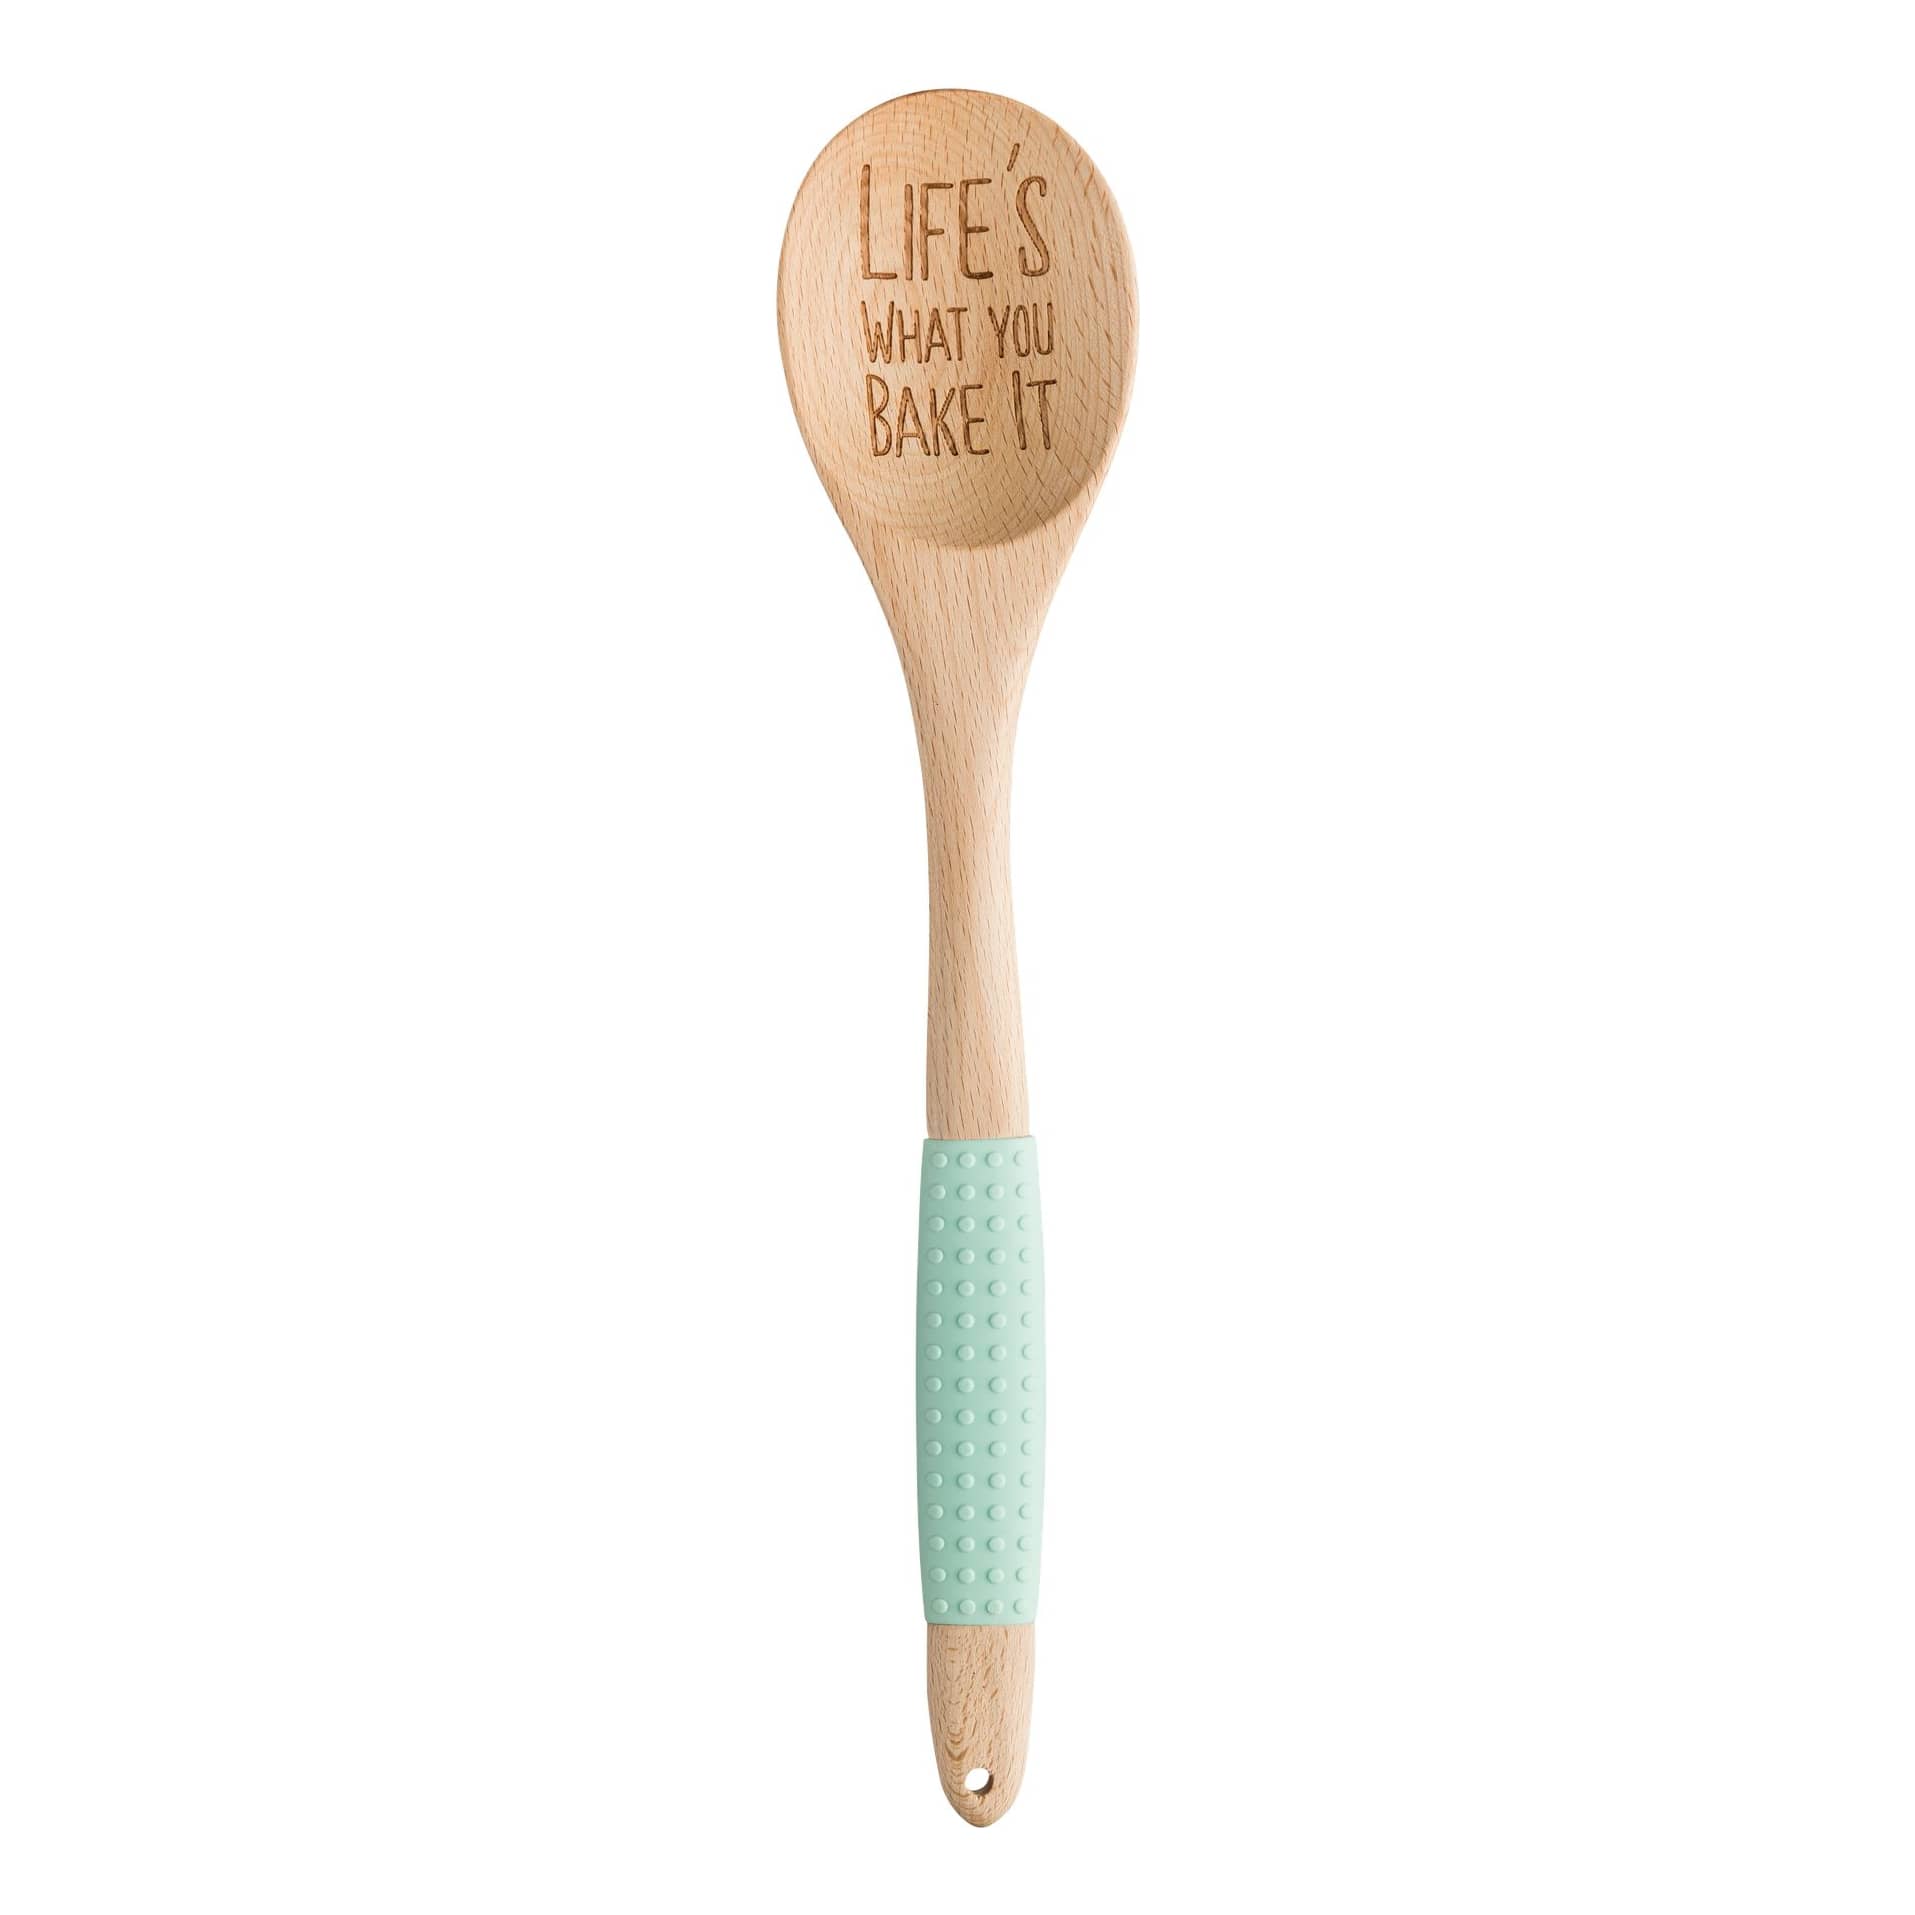 Bass Pro Shops® Life's What You Bake It Wooden Spoon